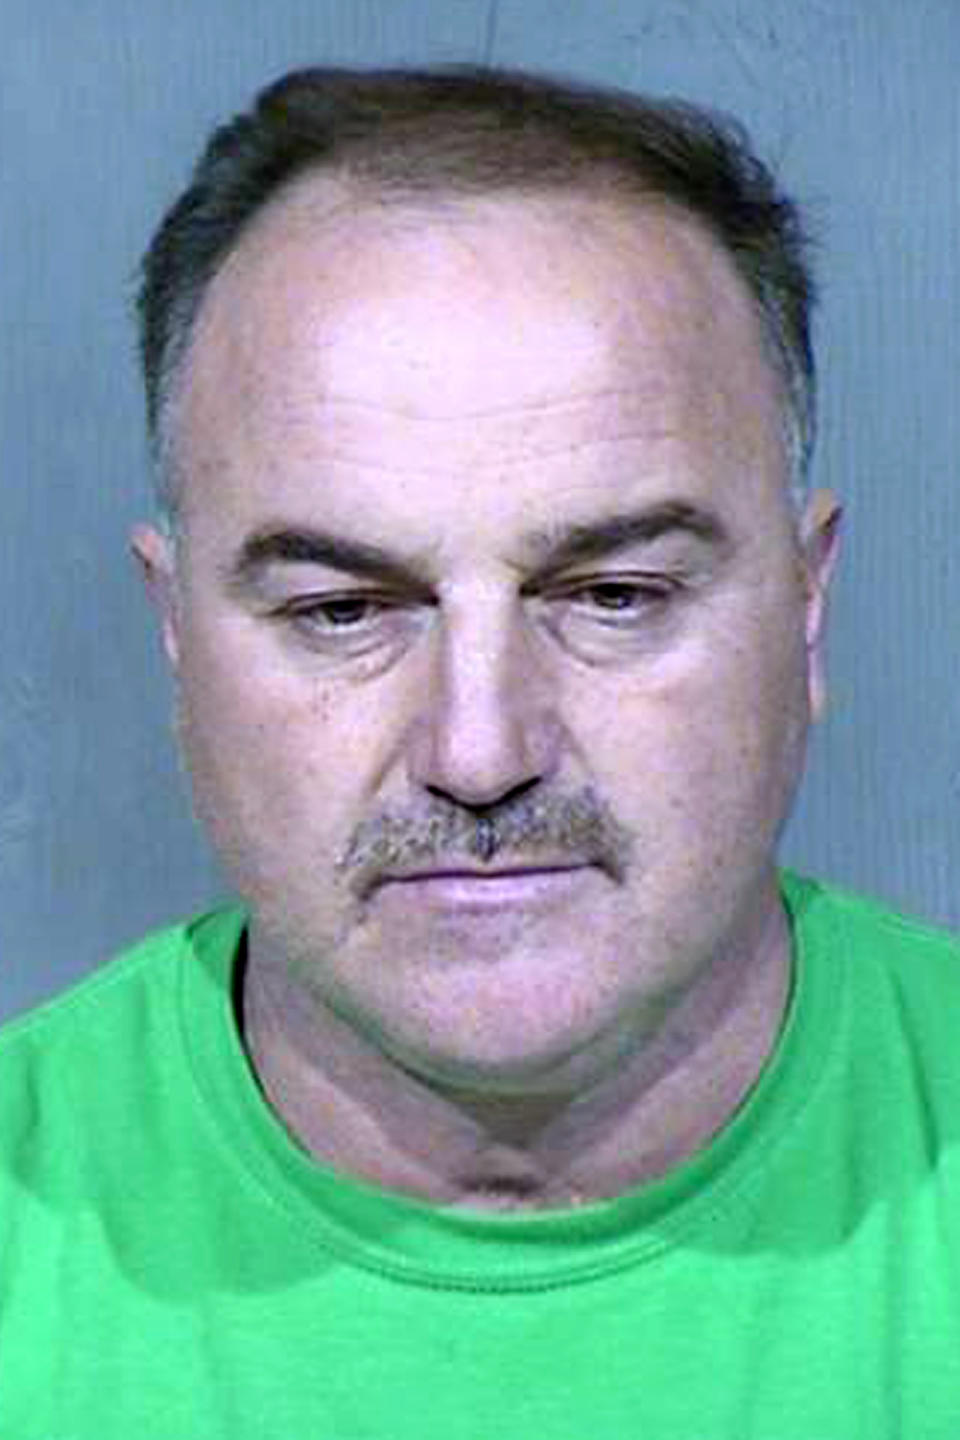 FILE - This undated booking photo provided by the Maricopa County Sheriff's Office shows Ali Yousif Ahmed Al-Nouri, who was arrested in January 2020 in Arizona as part of an extradition request made by the Iraqi government and has been accused of participating in the 2006 killing of two police officers in Iraq. A judge in Phoenix will hold a hearing on Thursday, July 15, 2021, over whether to sign off on a request to extradite Ahmed to Iraq. Ahmed has denied involvement in the killings. (Maricopa County Sheriff's Office via AP)